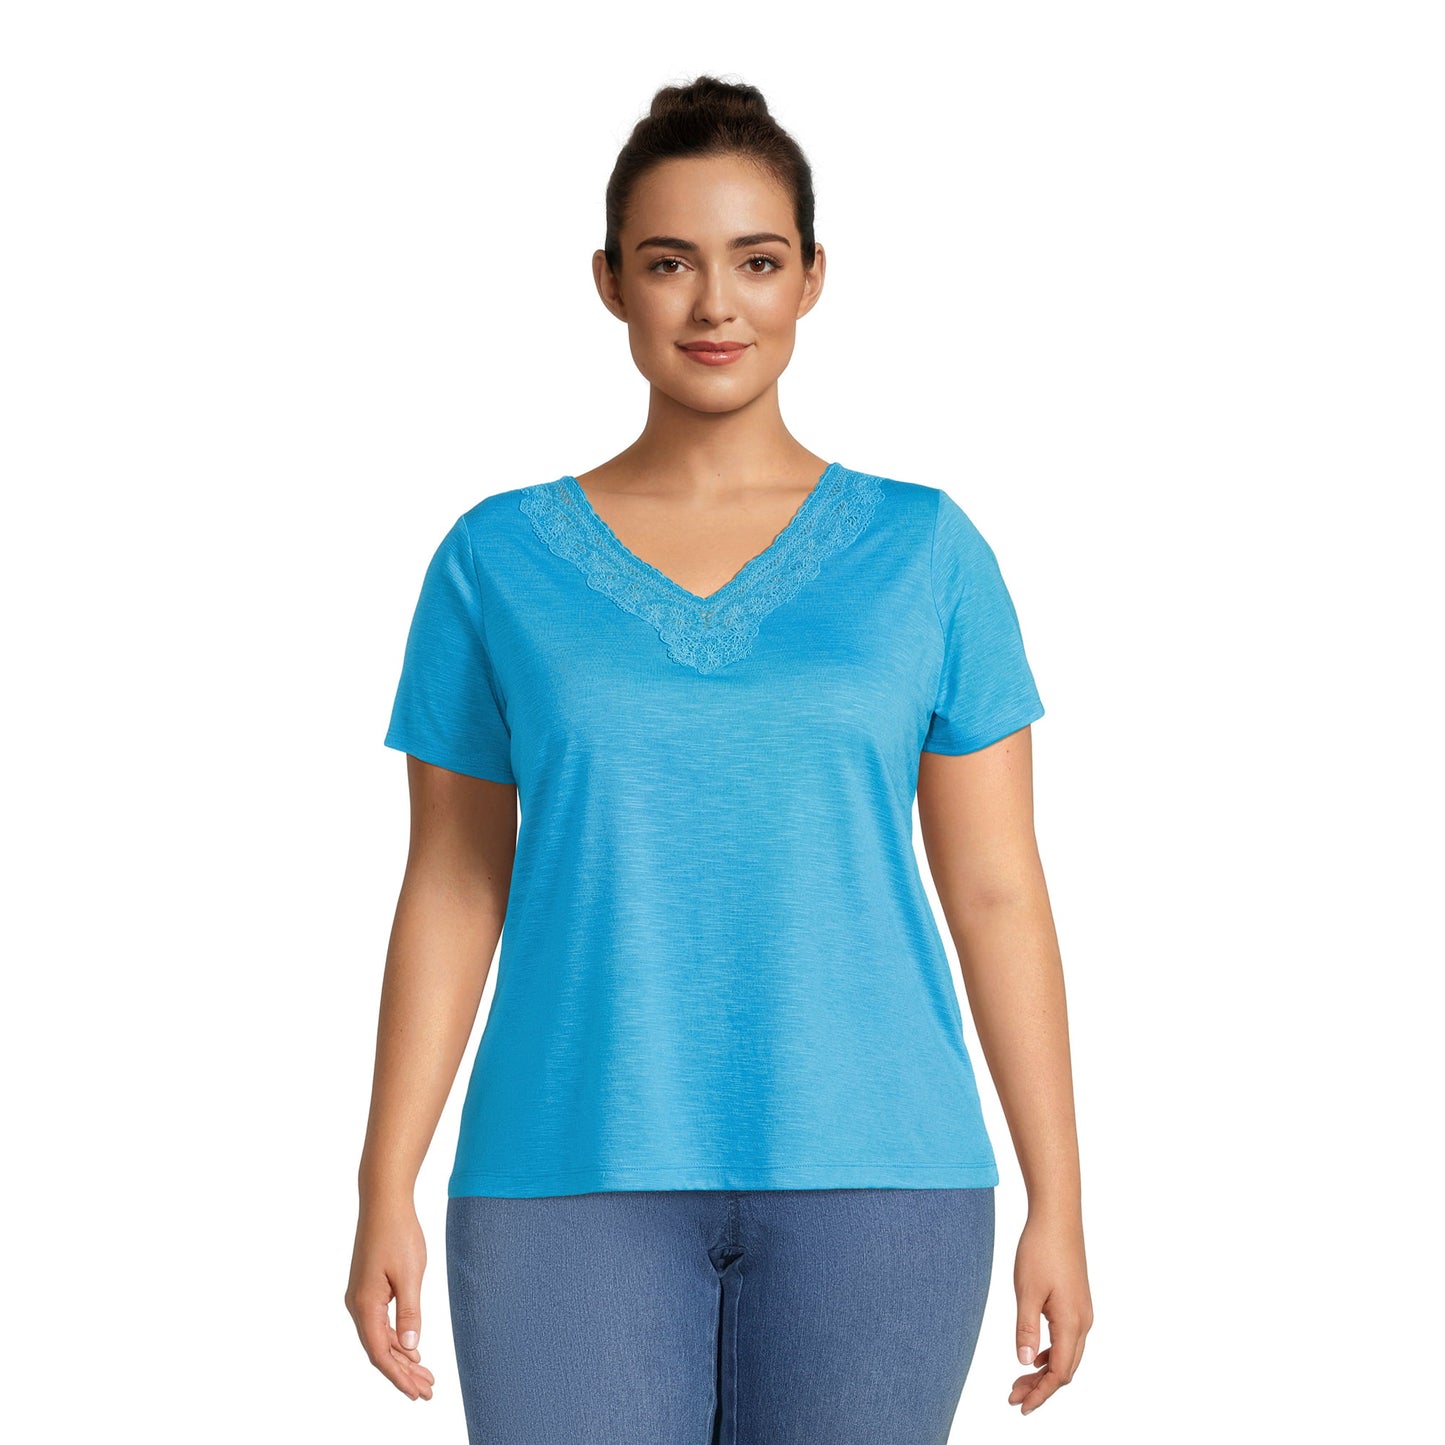 RealSize Women's Plus Lace V-Neck Tee with Short Sleeves